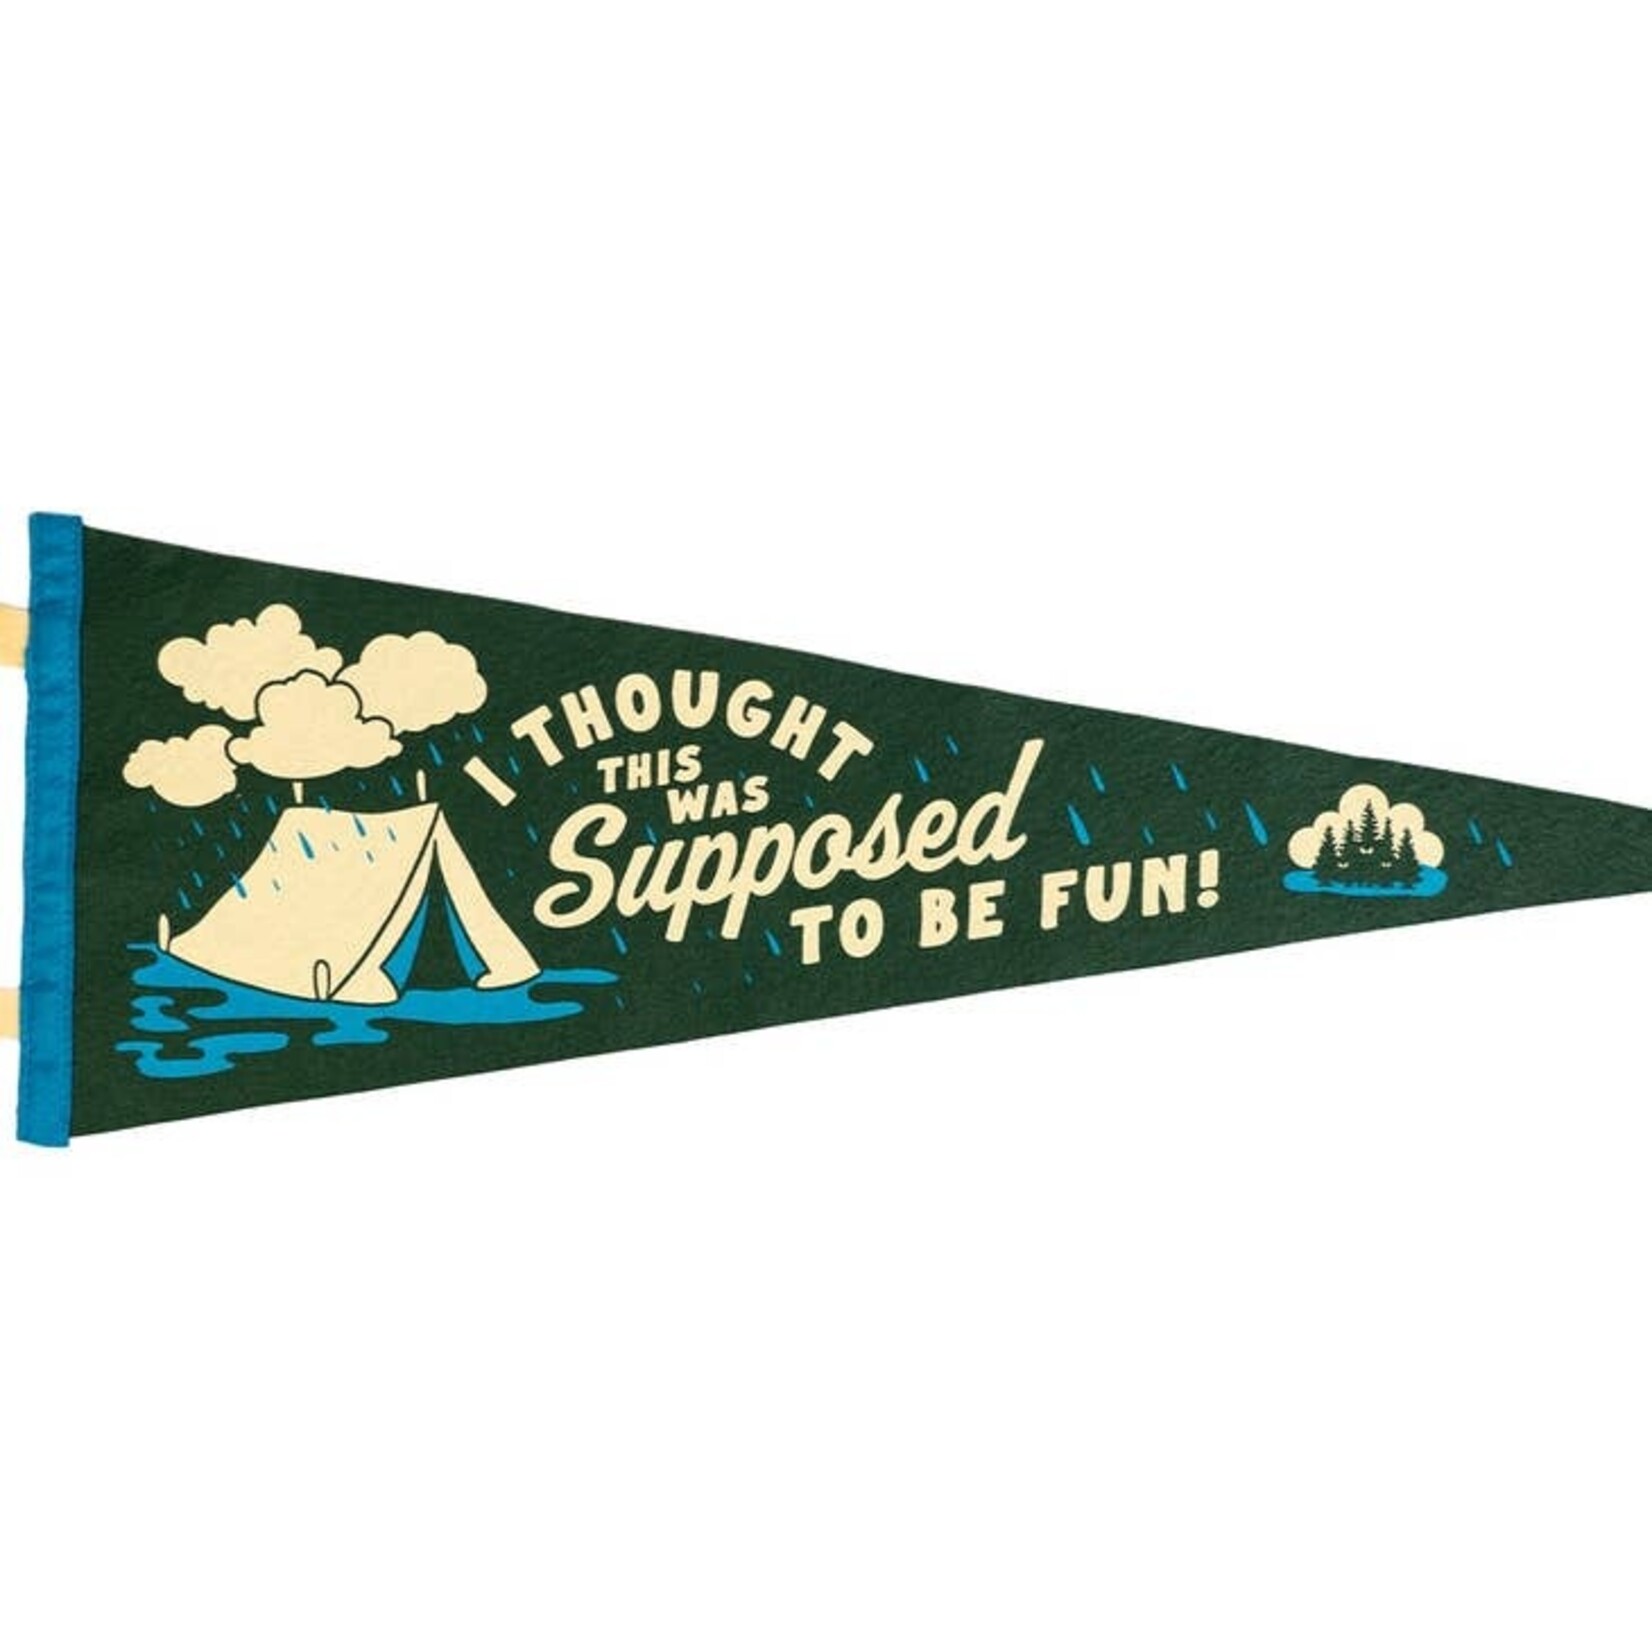 Pennants Suppose To Be Fun Pennant